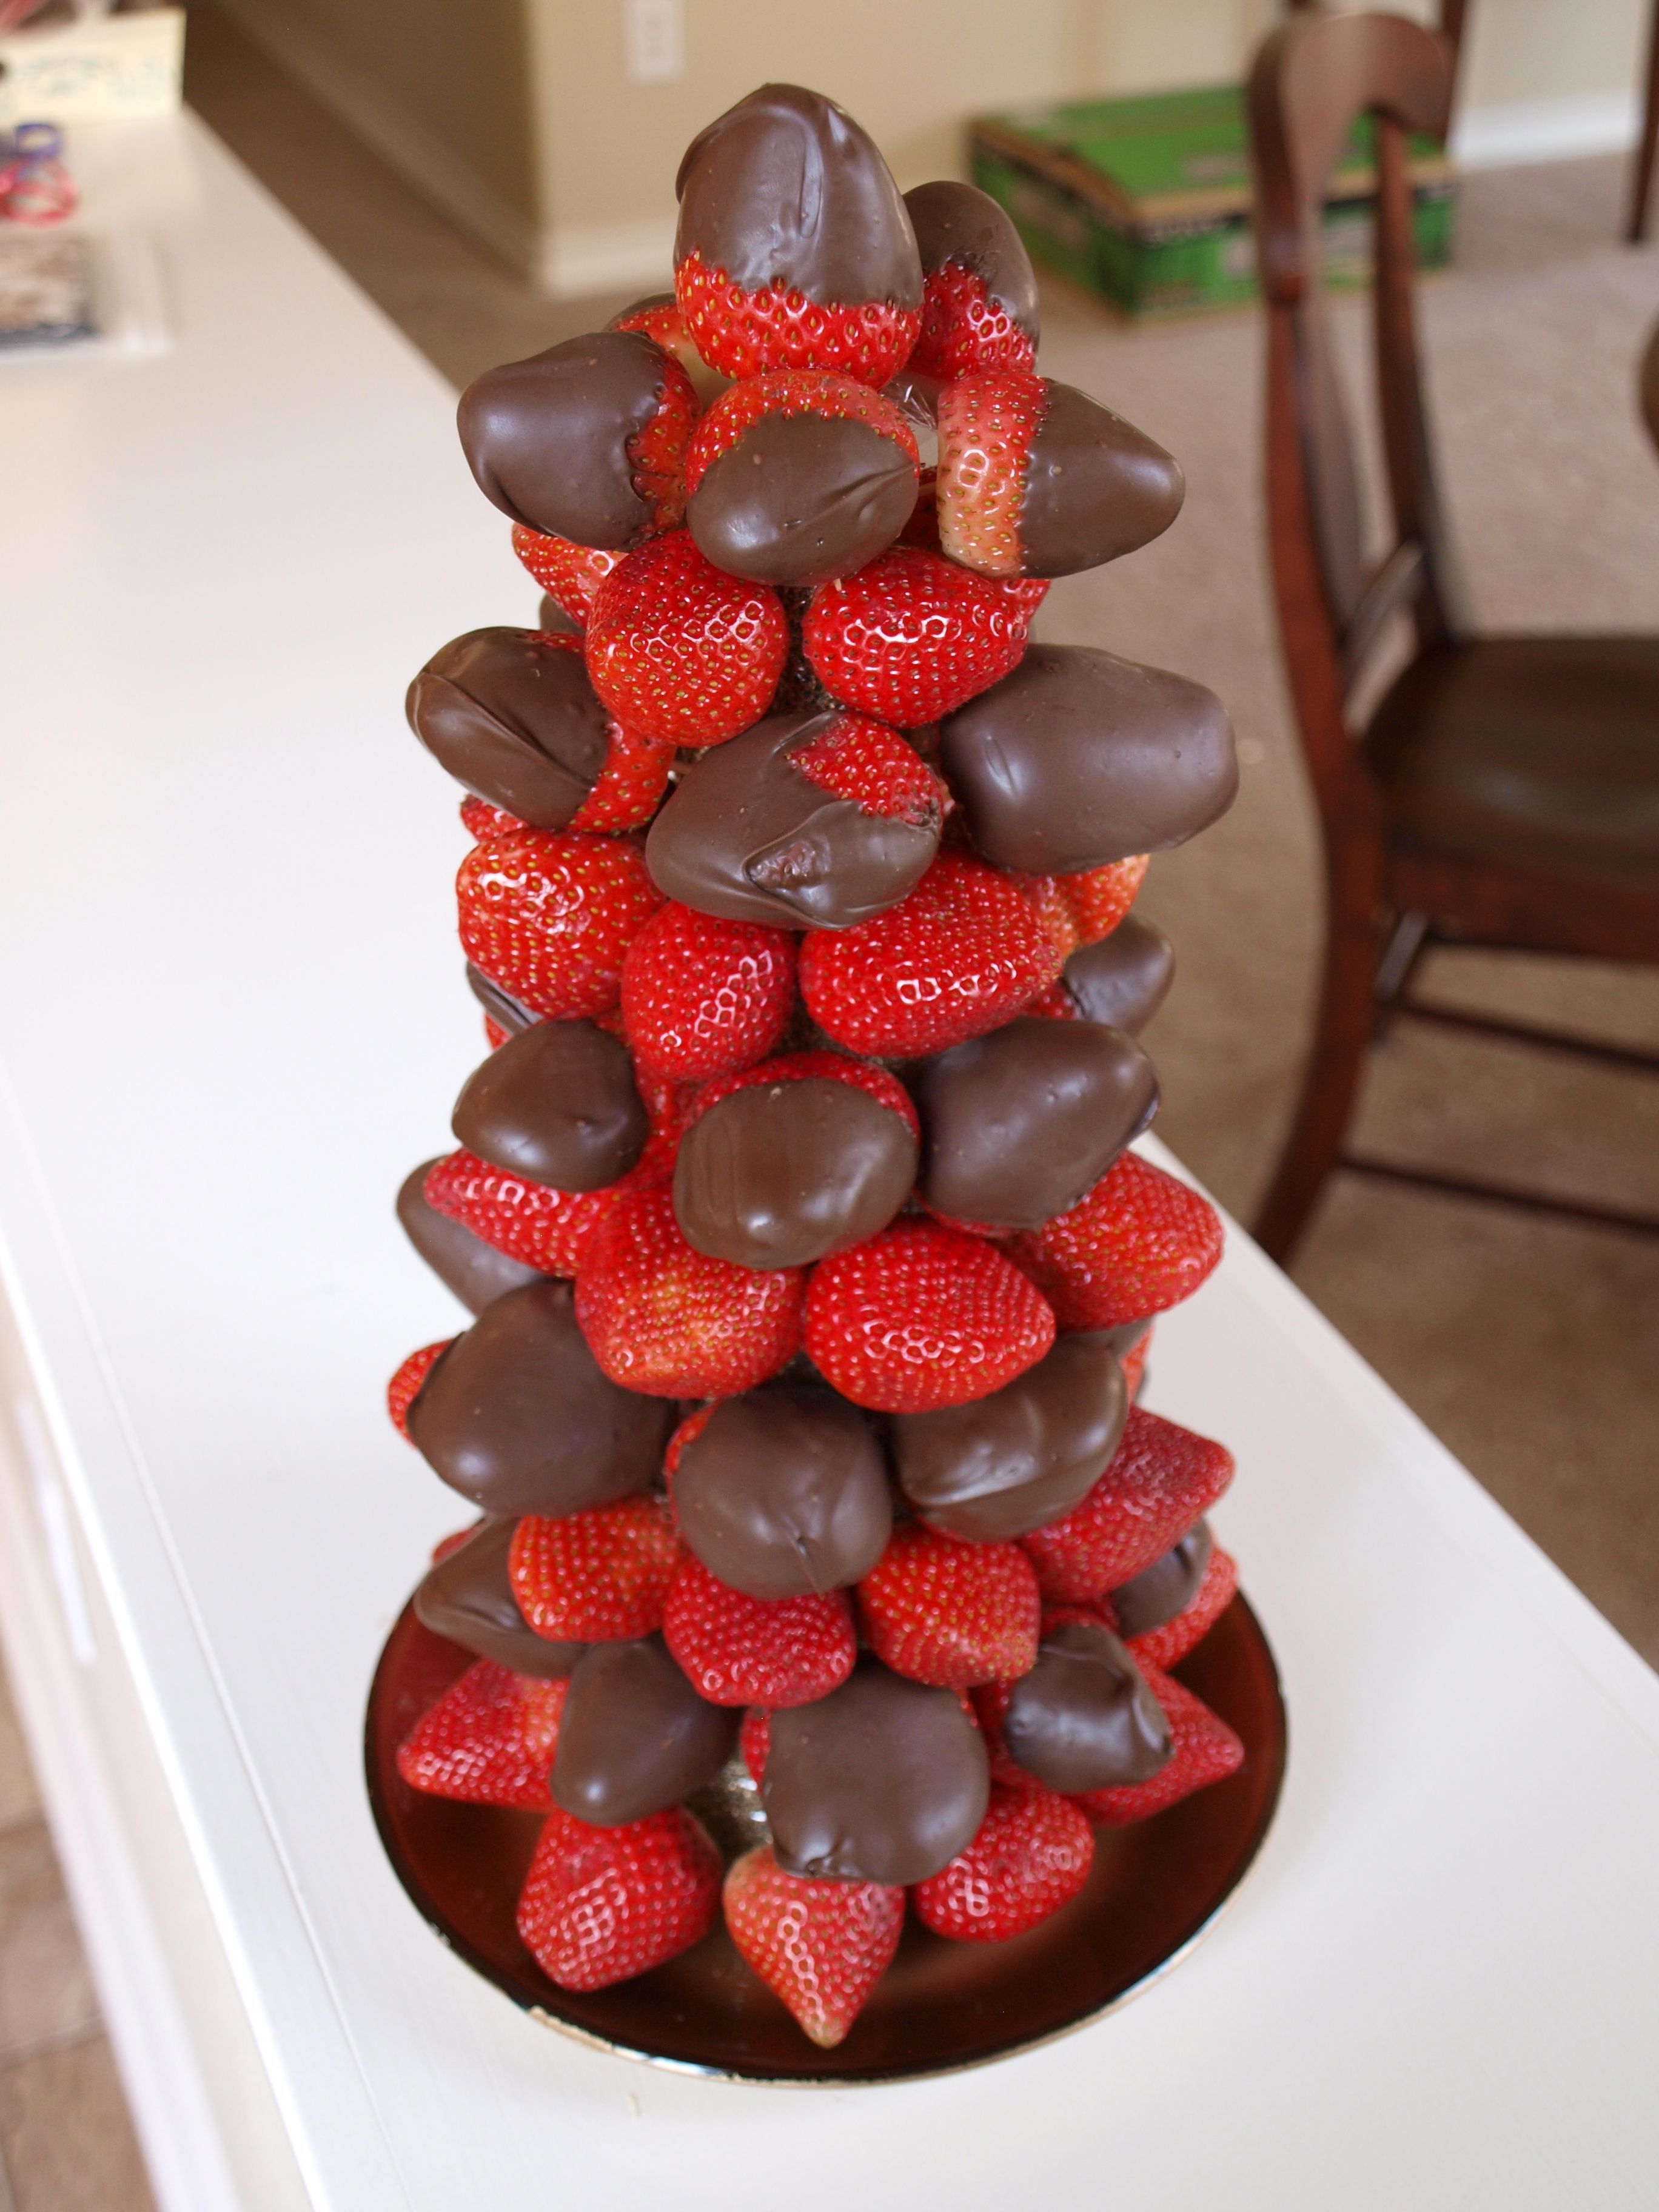 1. Gather your Ingredients and Tools -   How to Create a Chocolate Tree